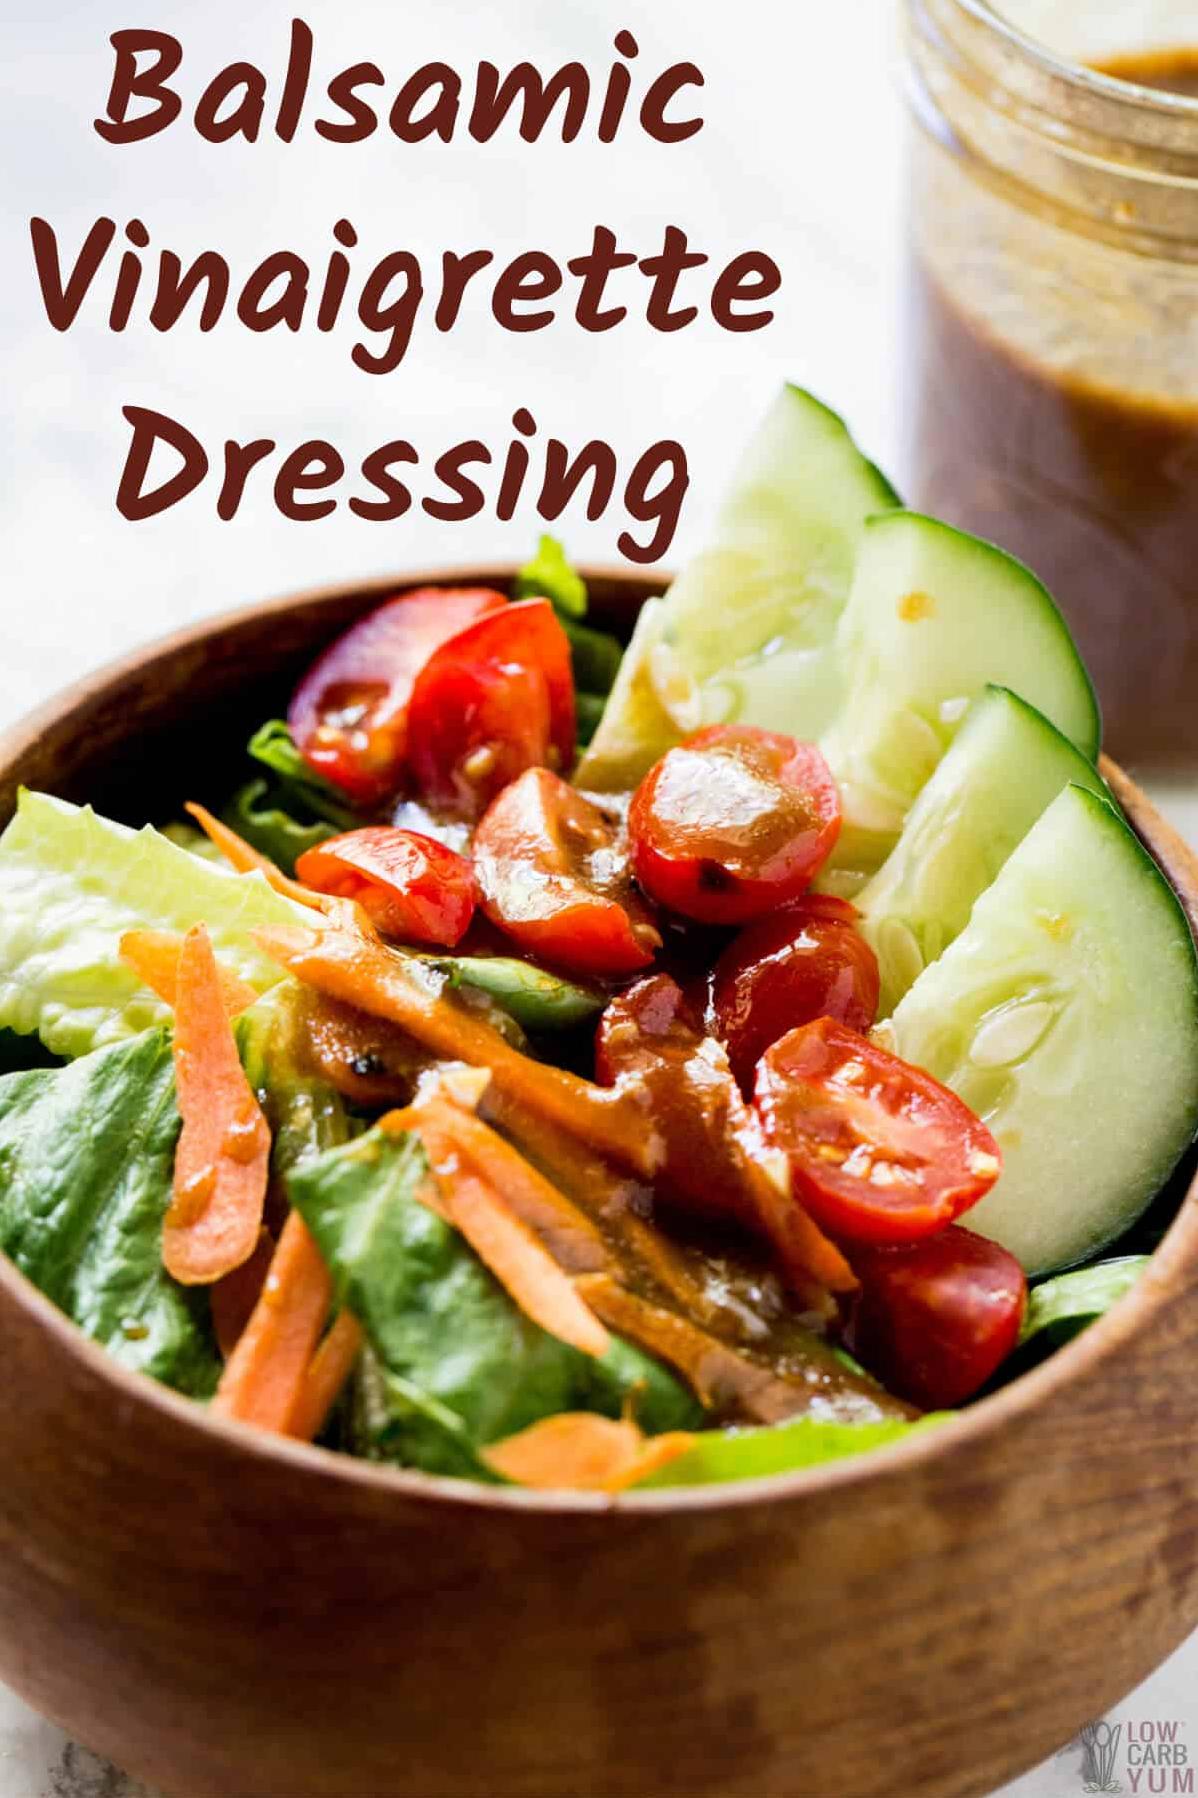  Say goodbye to boring salads and hello to tasty dressing with just a few ingredients!